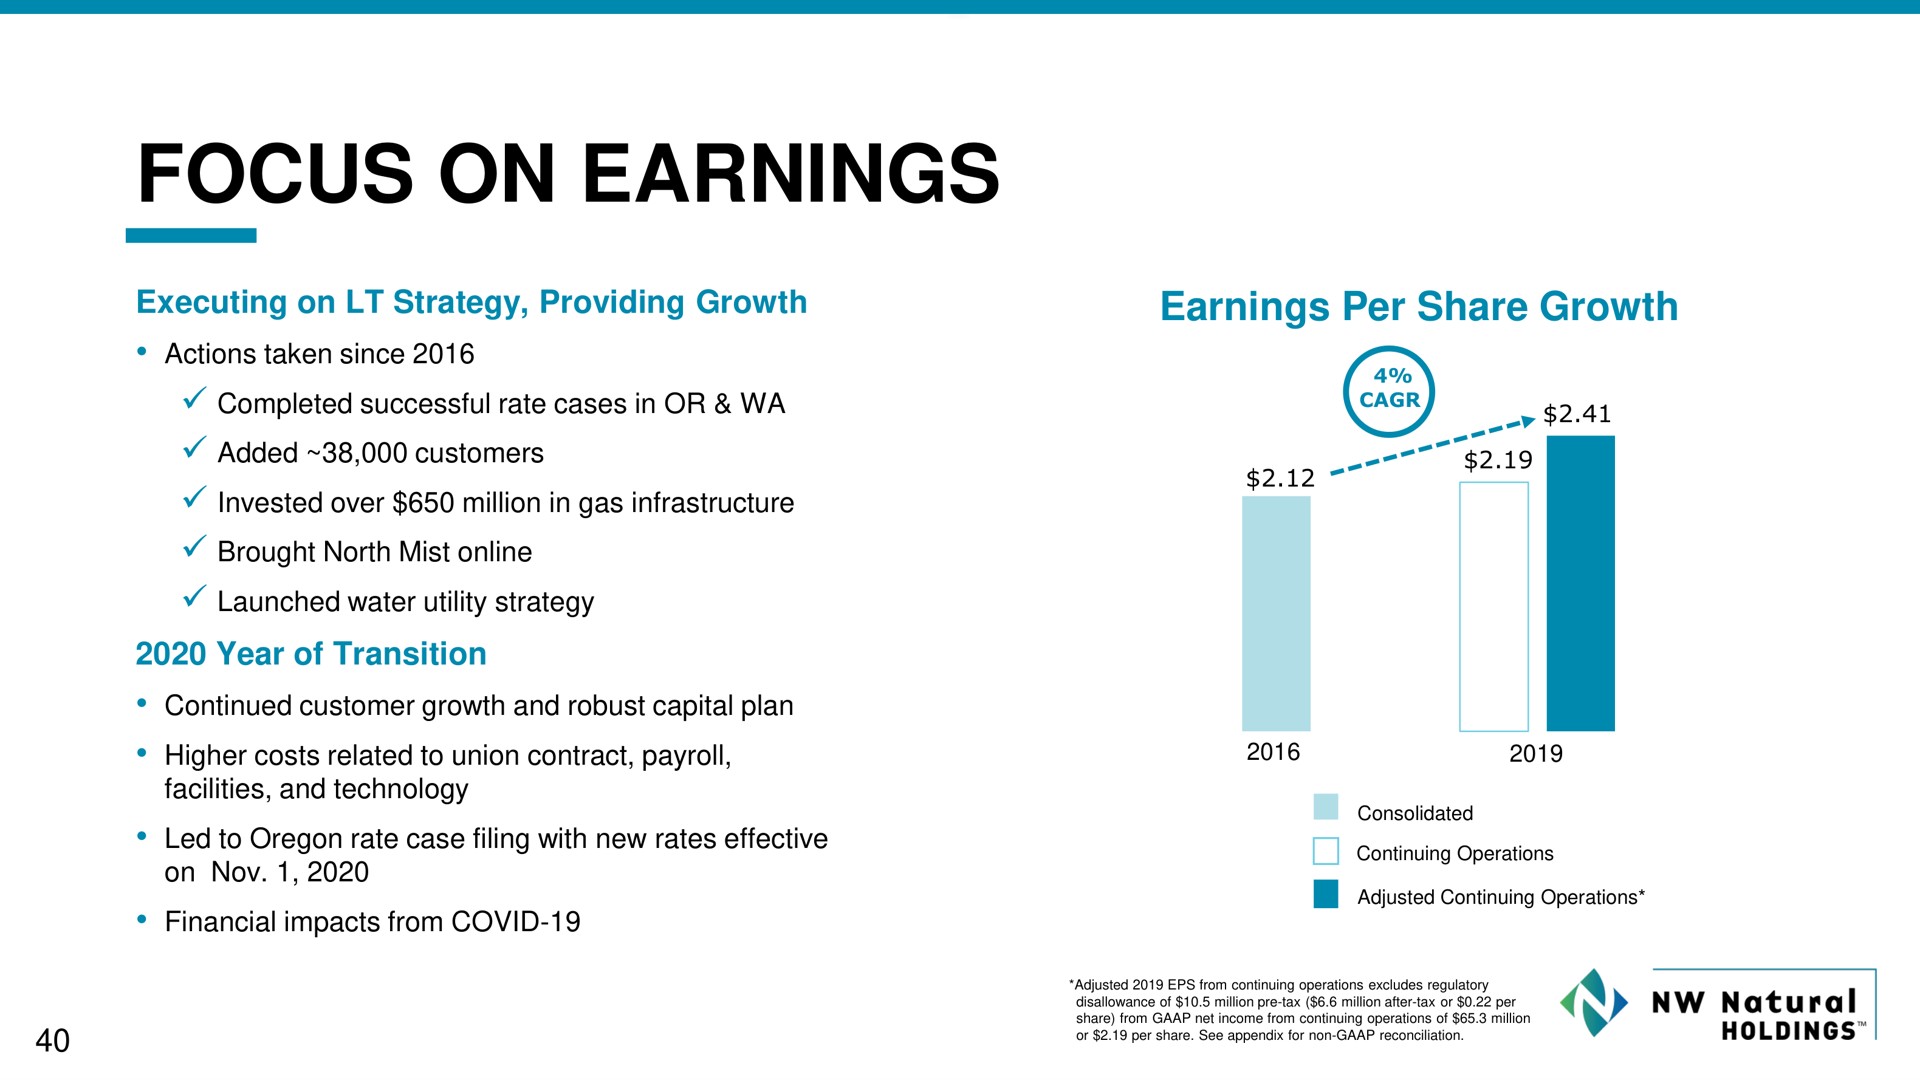 focus on earnings | NW Natural Holdings